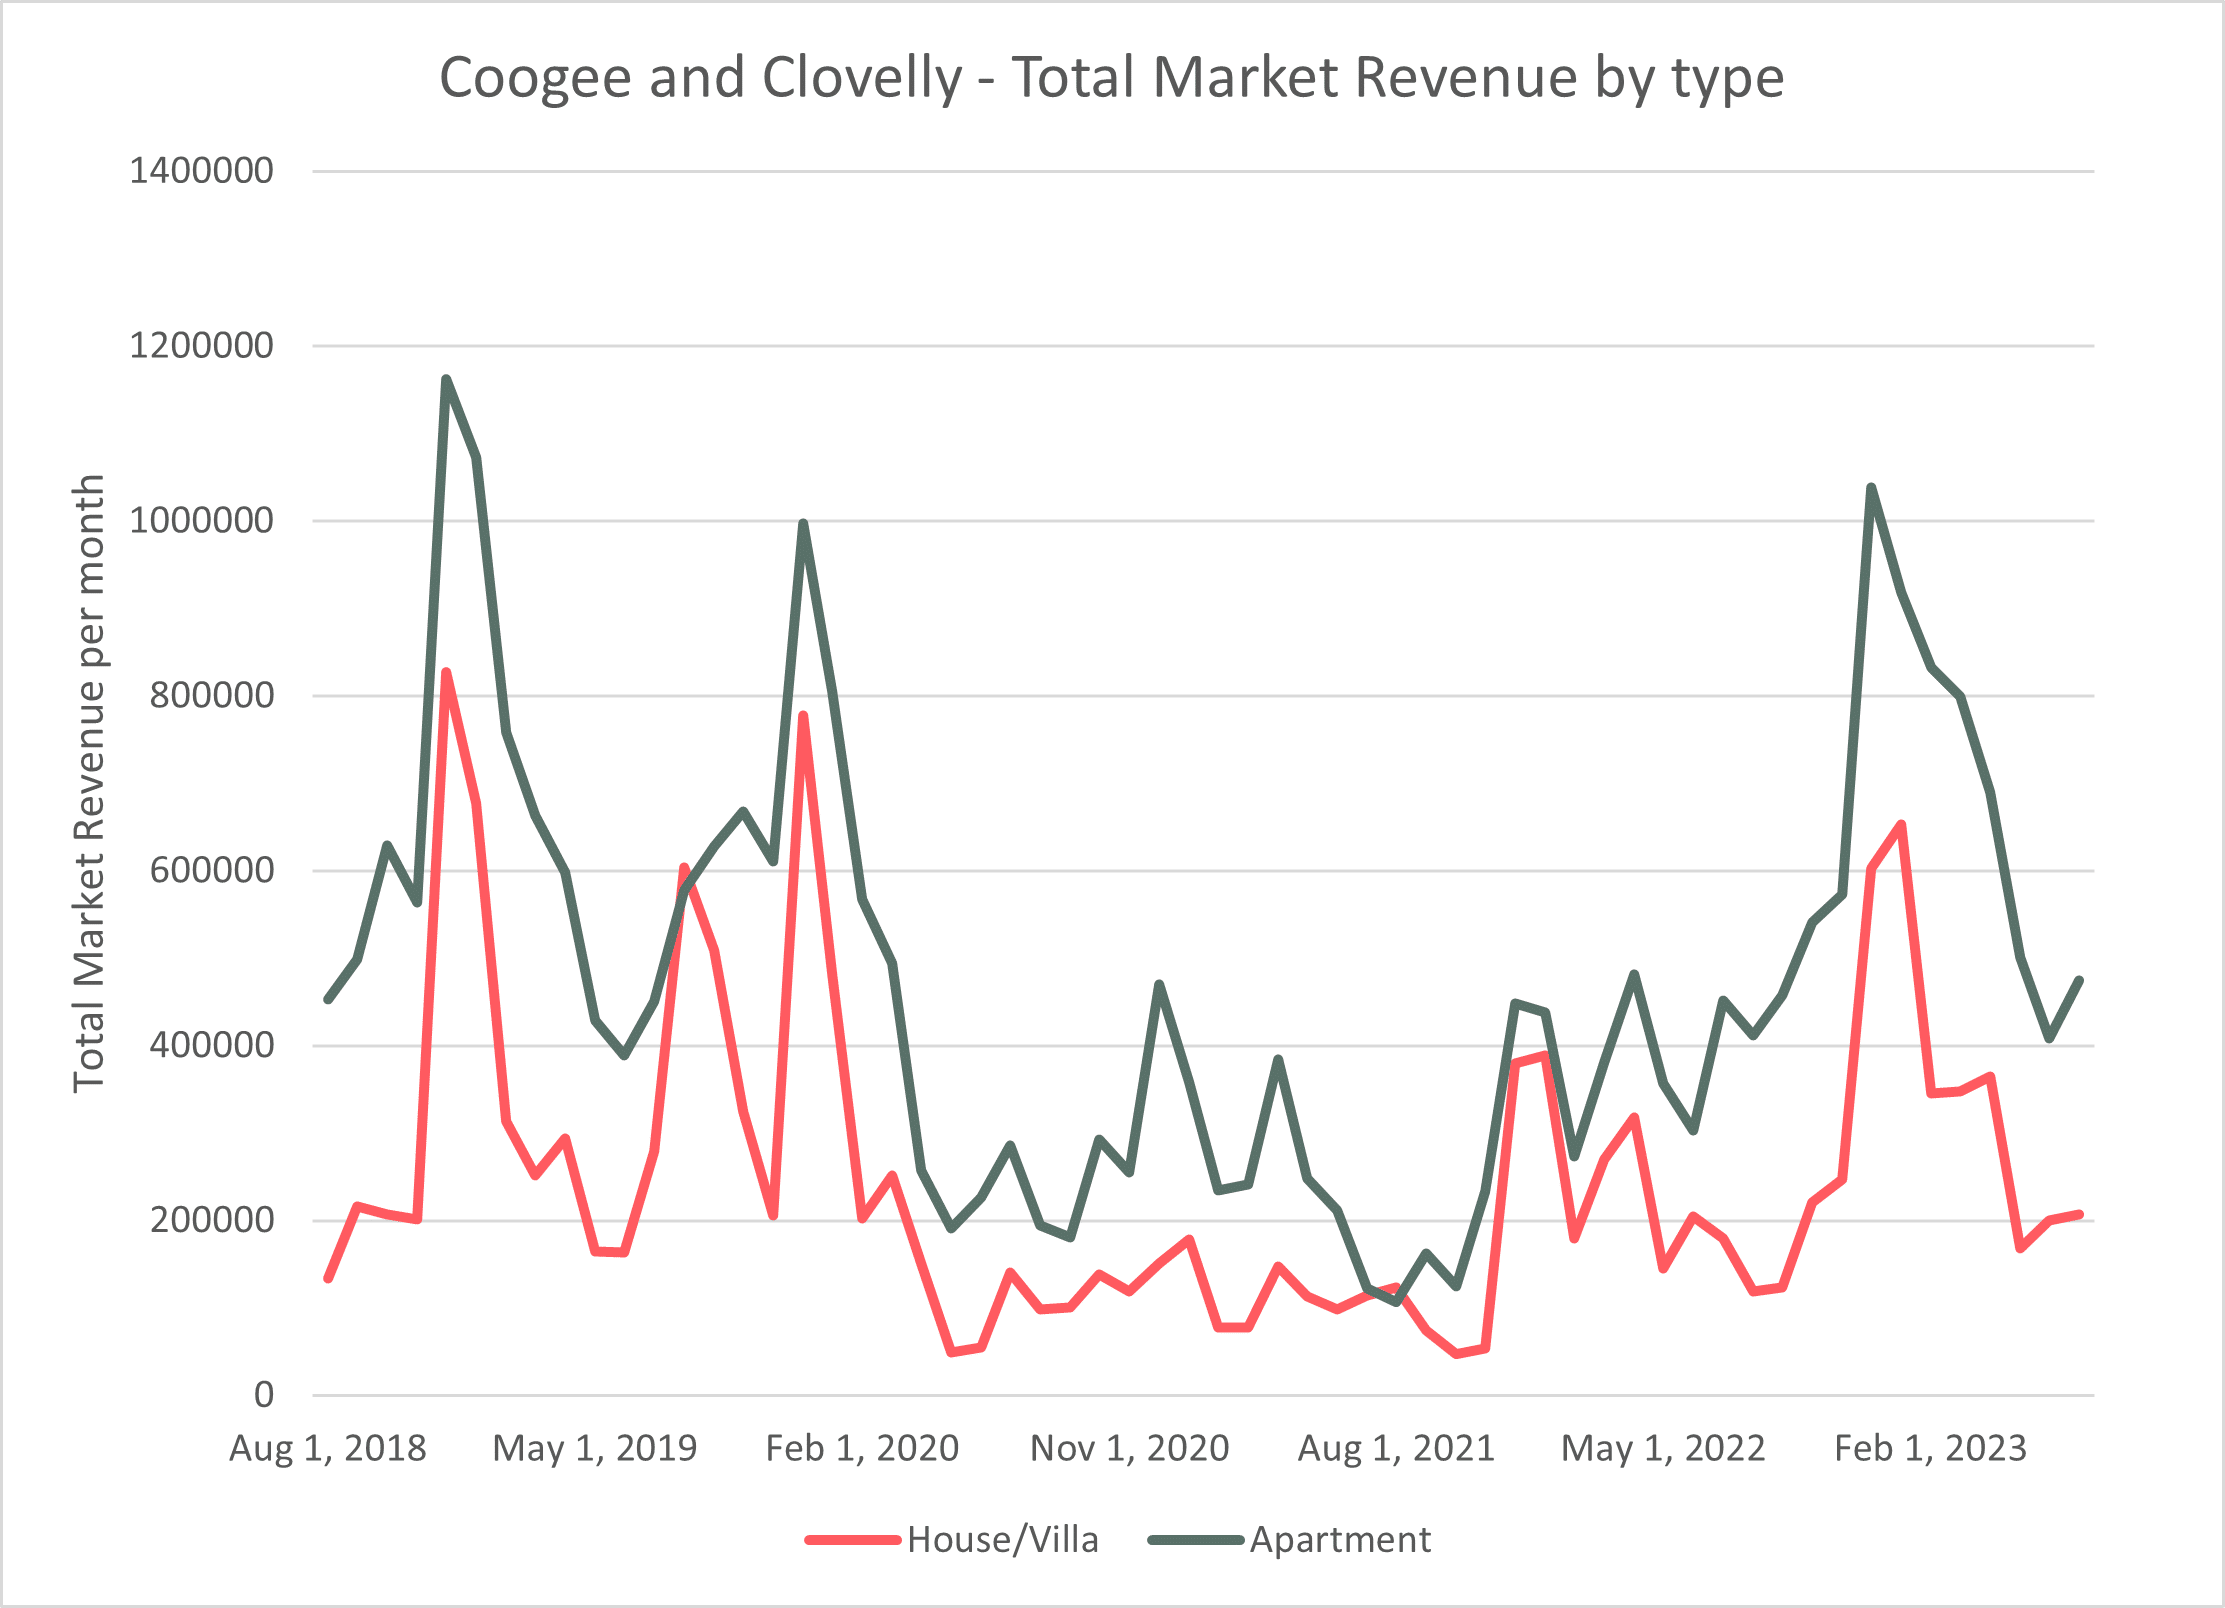 coogeeclovelly masrketrevenue by type